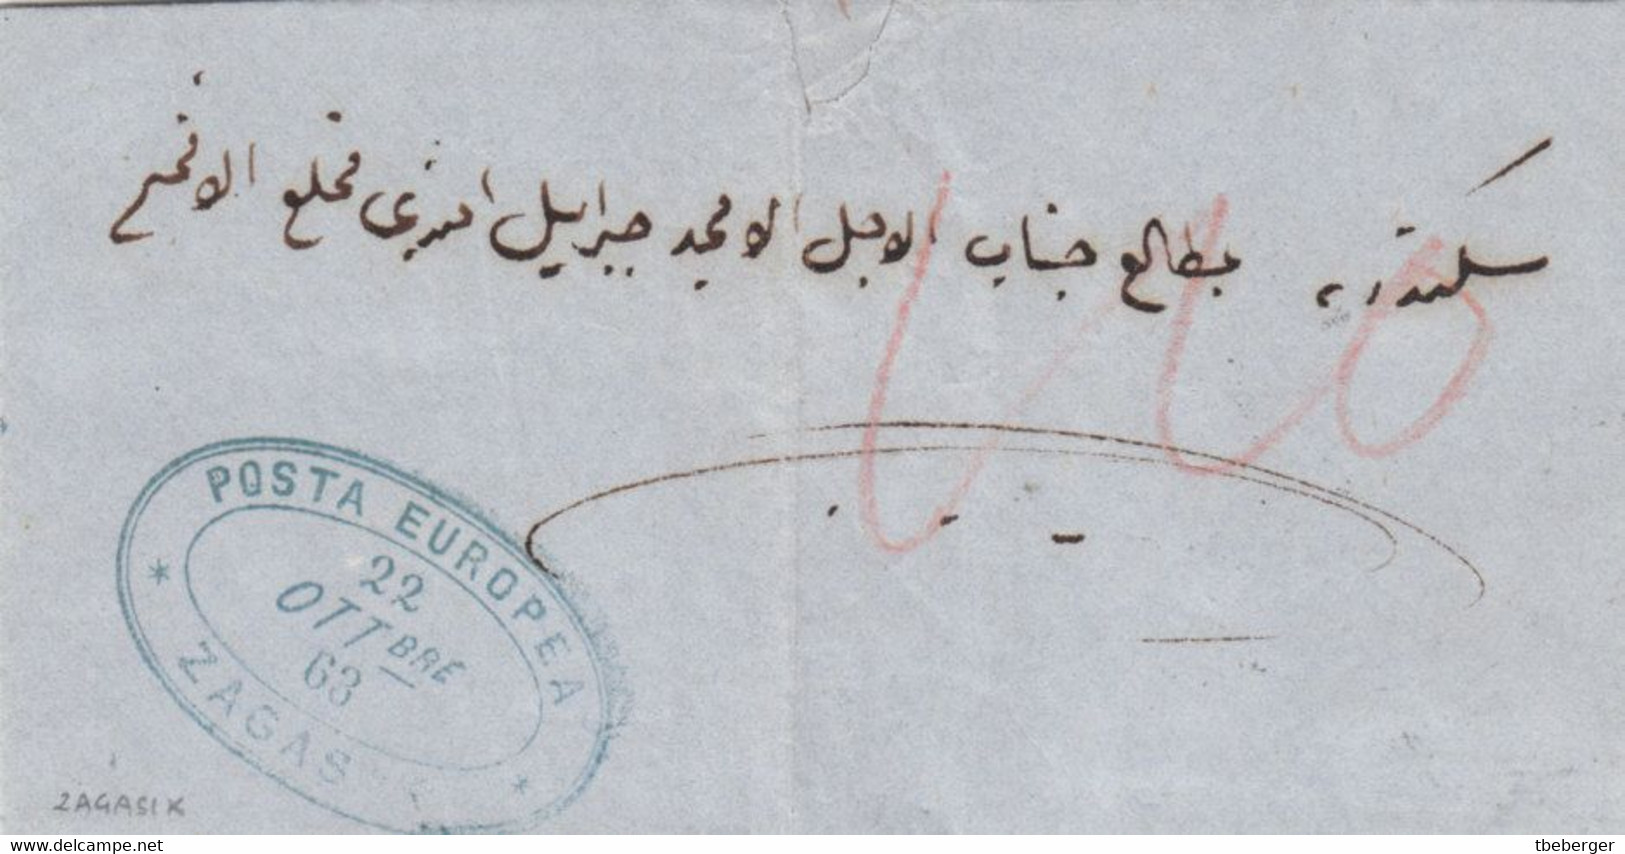 Egypt POSTA EUROPEA - ZAGASIK Type 5 In Blue, Cover October 1863 To Alexandria, Ex Collection Provera (ae81) - Voorfilatelie